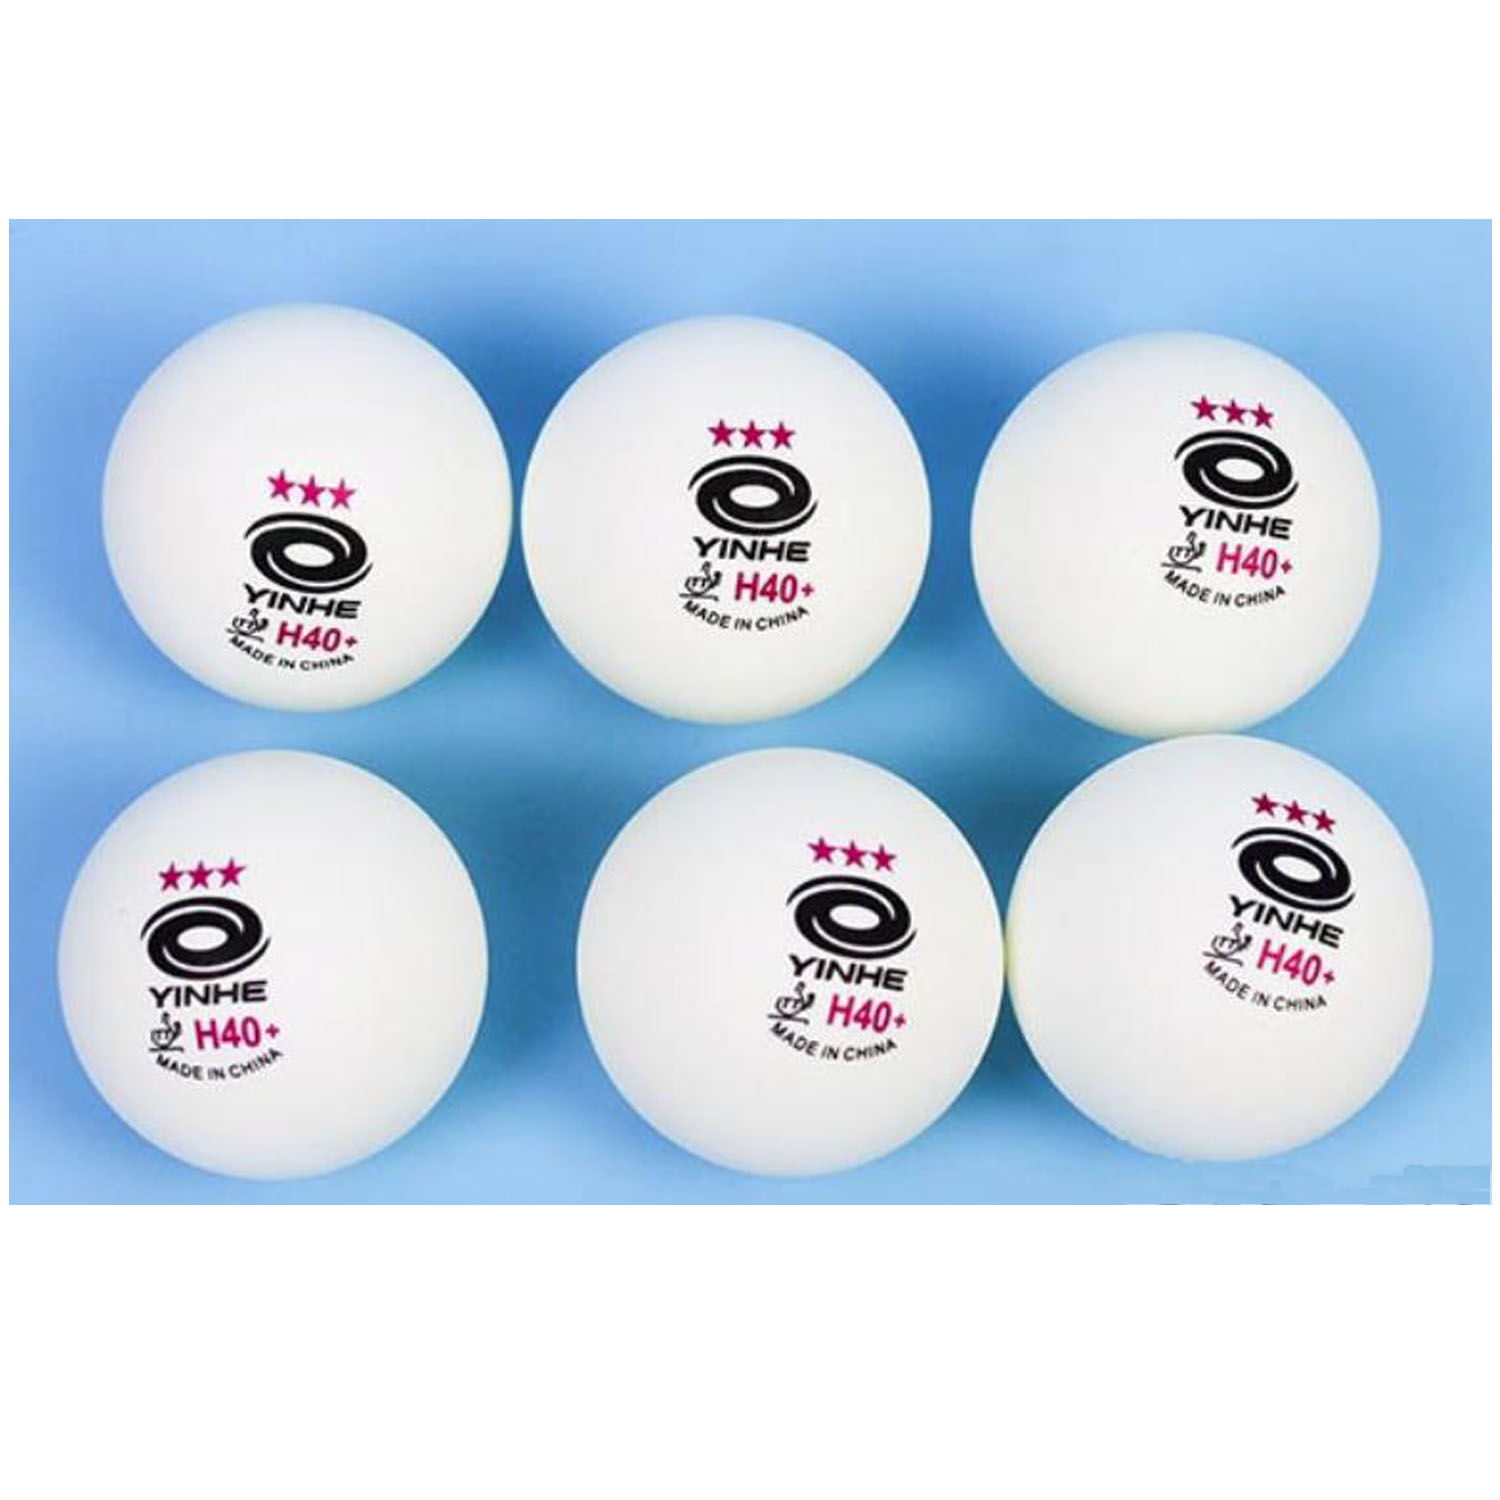 6xYinhe 3 star 40 poly ball white pingpong ball ITTF seamless shipping from CA 